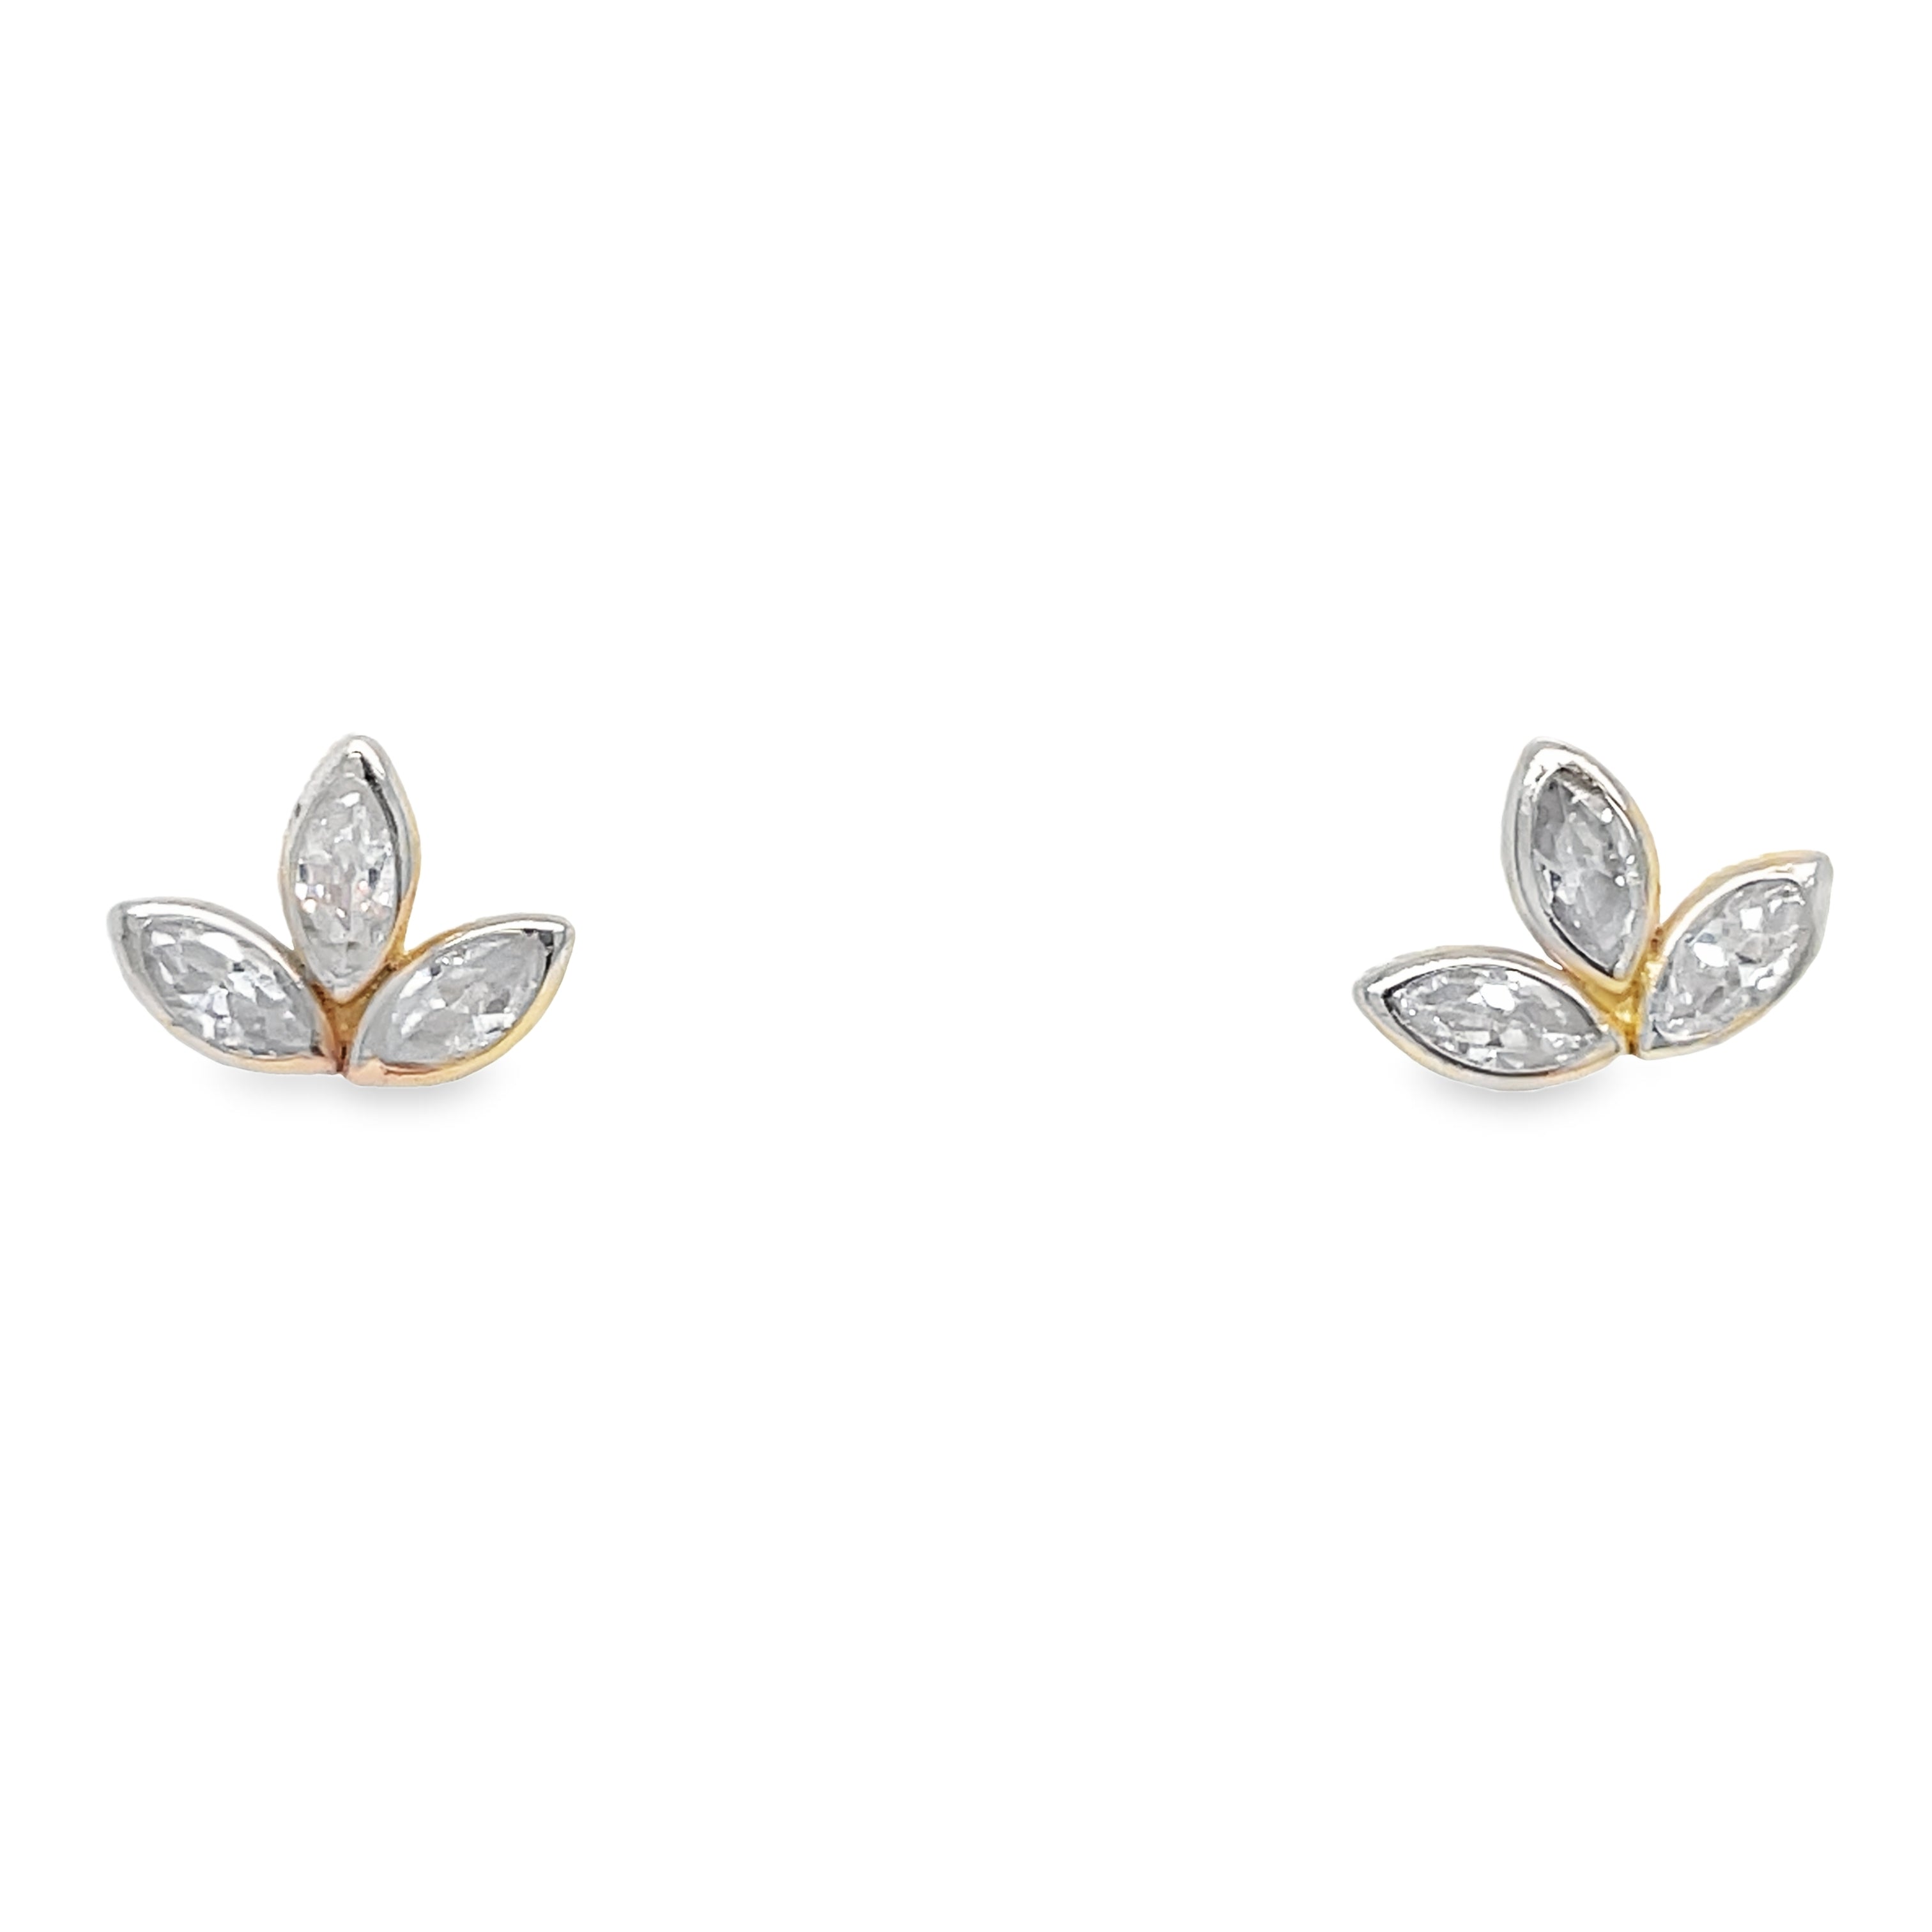 <p><span style="font-size: 0.875rem;">These exquisite flower earrings for babies feature 14k yellow gold construction with three petal with zirconia shape securely affixed using baby screw backs.</span></p> <p>&nbsp;</p>